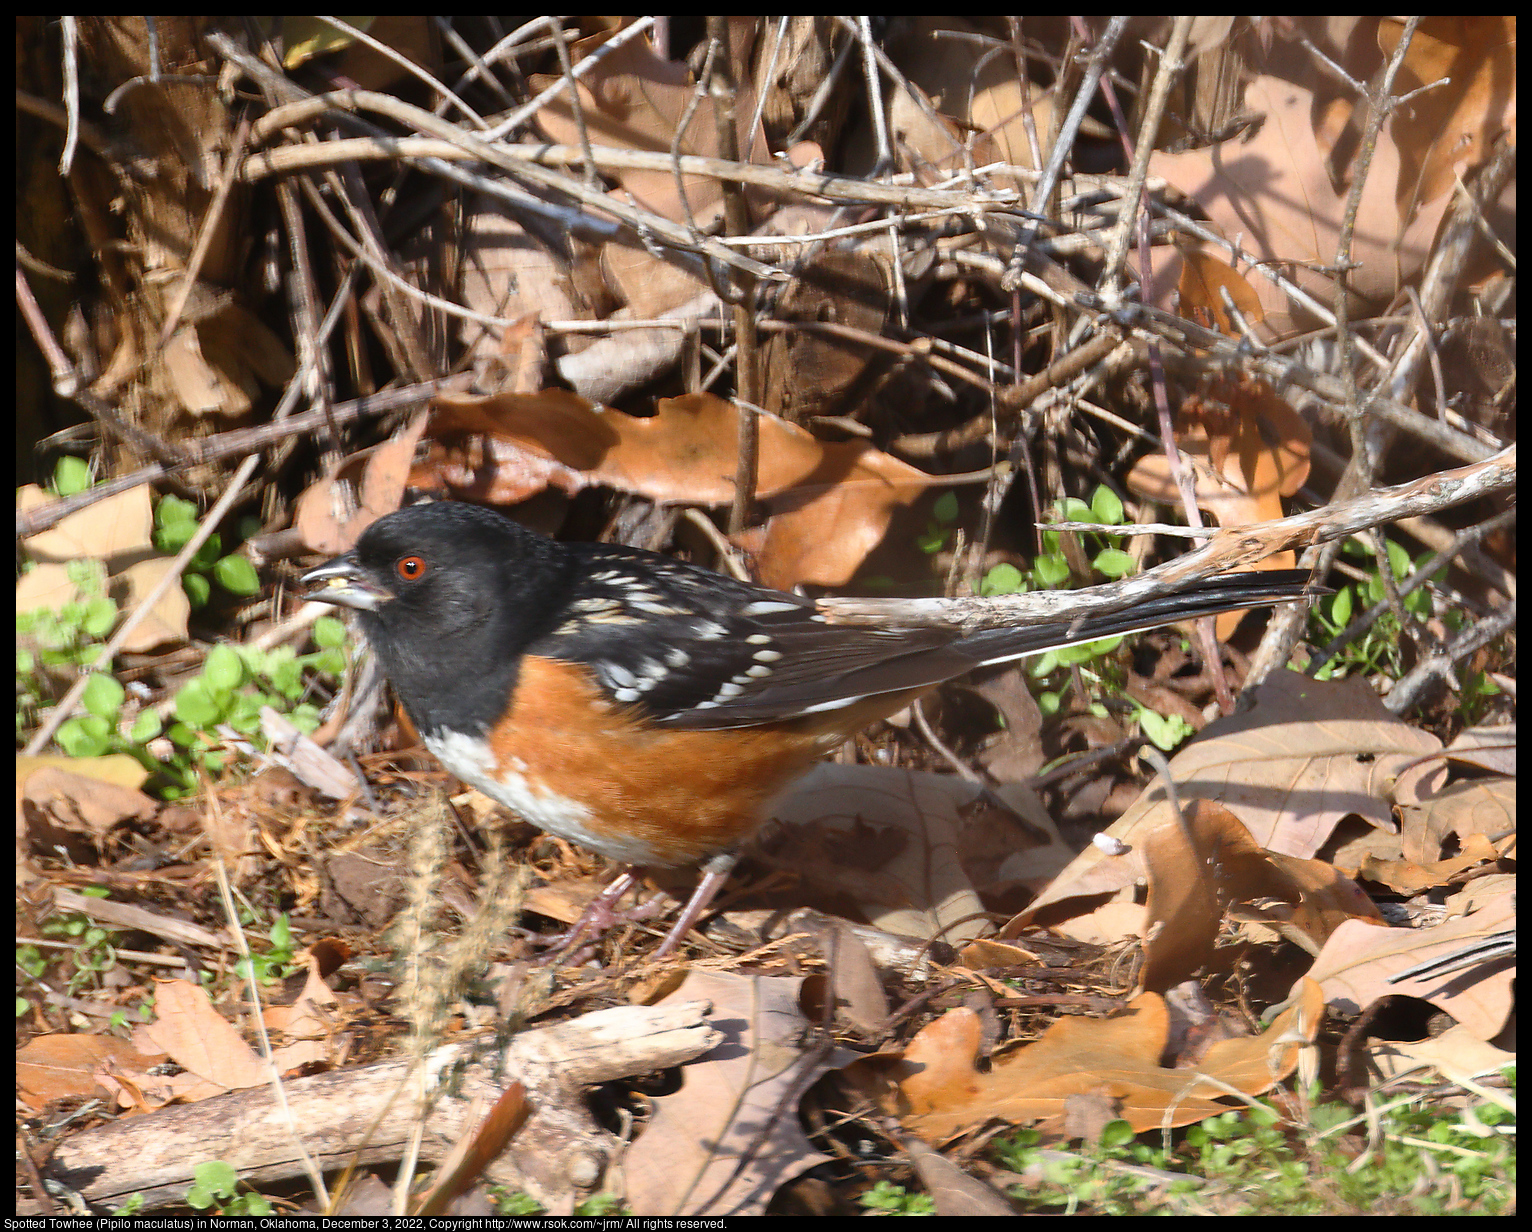 Spotted Towhee (Pipilo maculatus) in Norman, Oklahoma, December 3, 2022